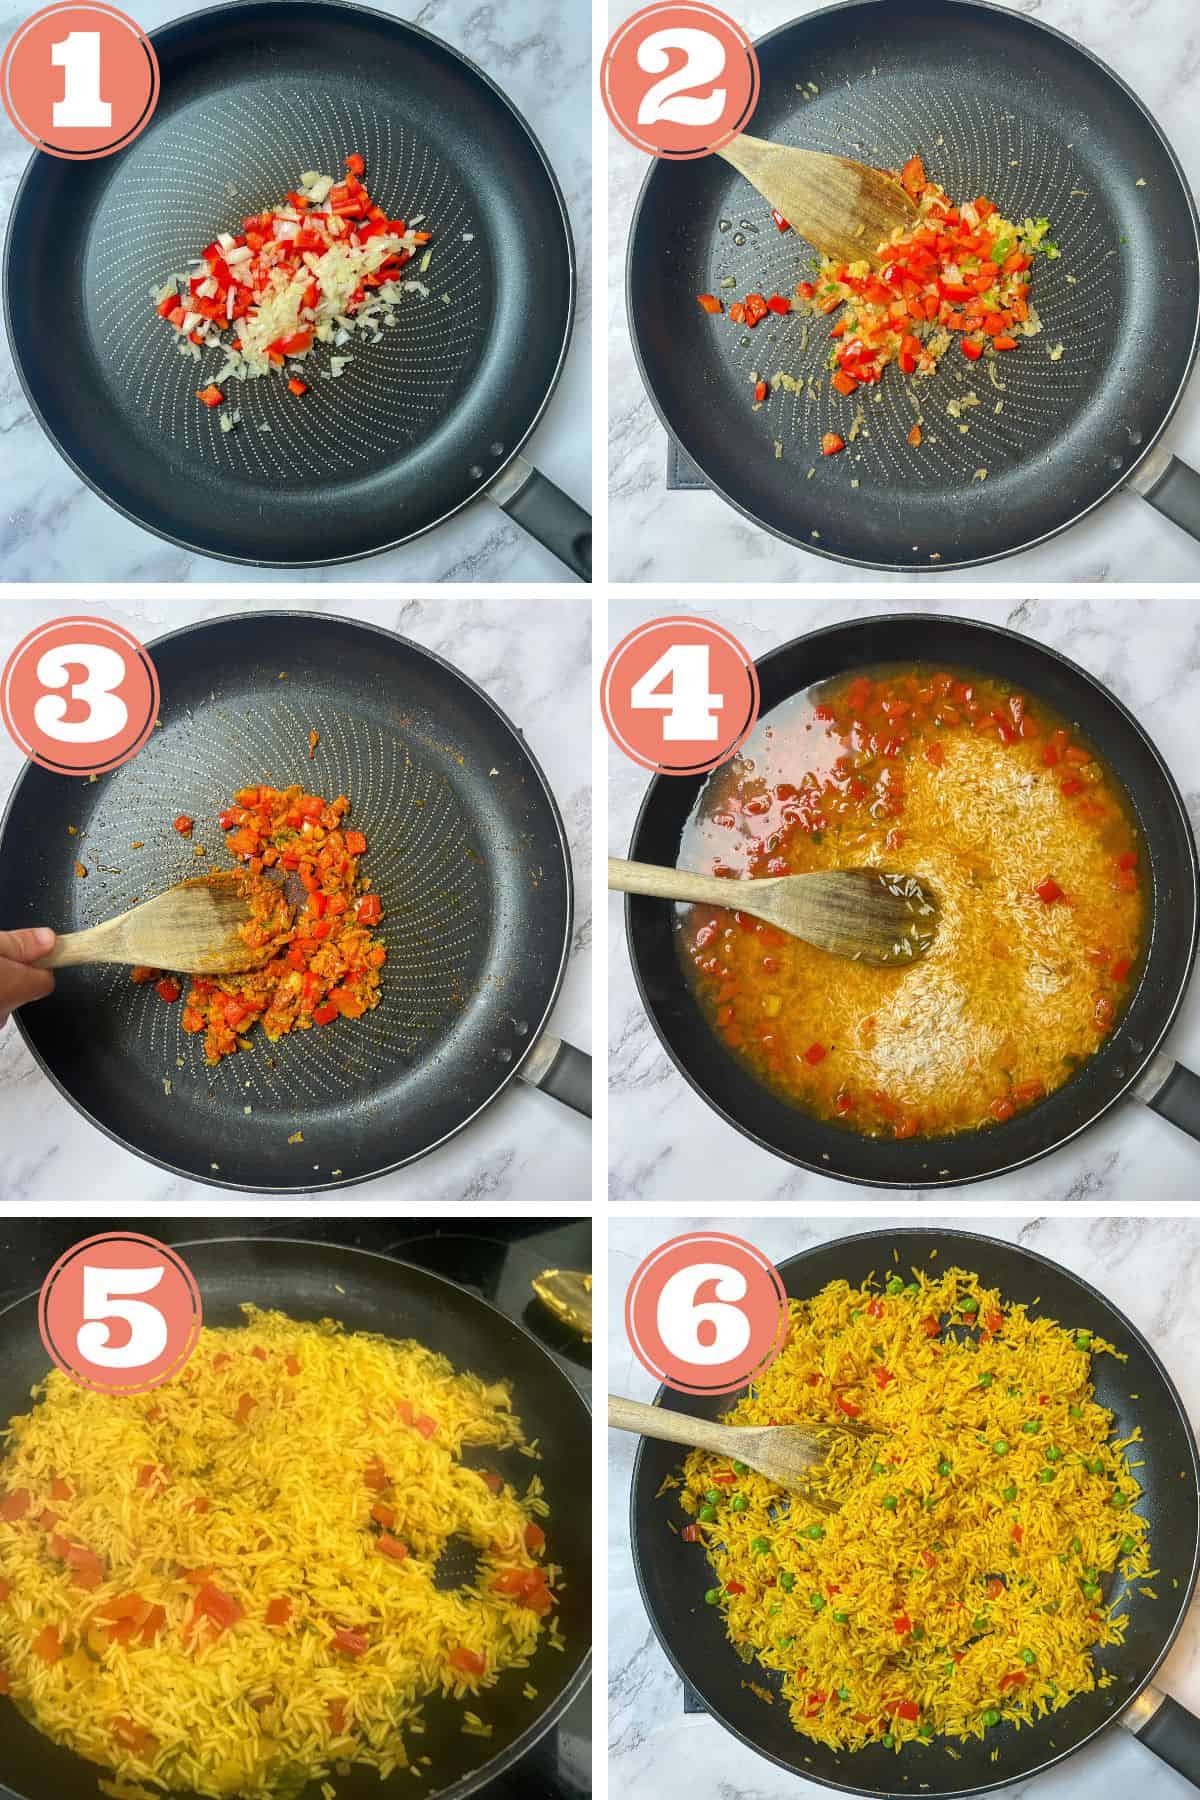 showing the 56 steps to make nandos spicy rice, all the ingredients at different stages in a frying pan.